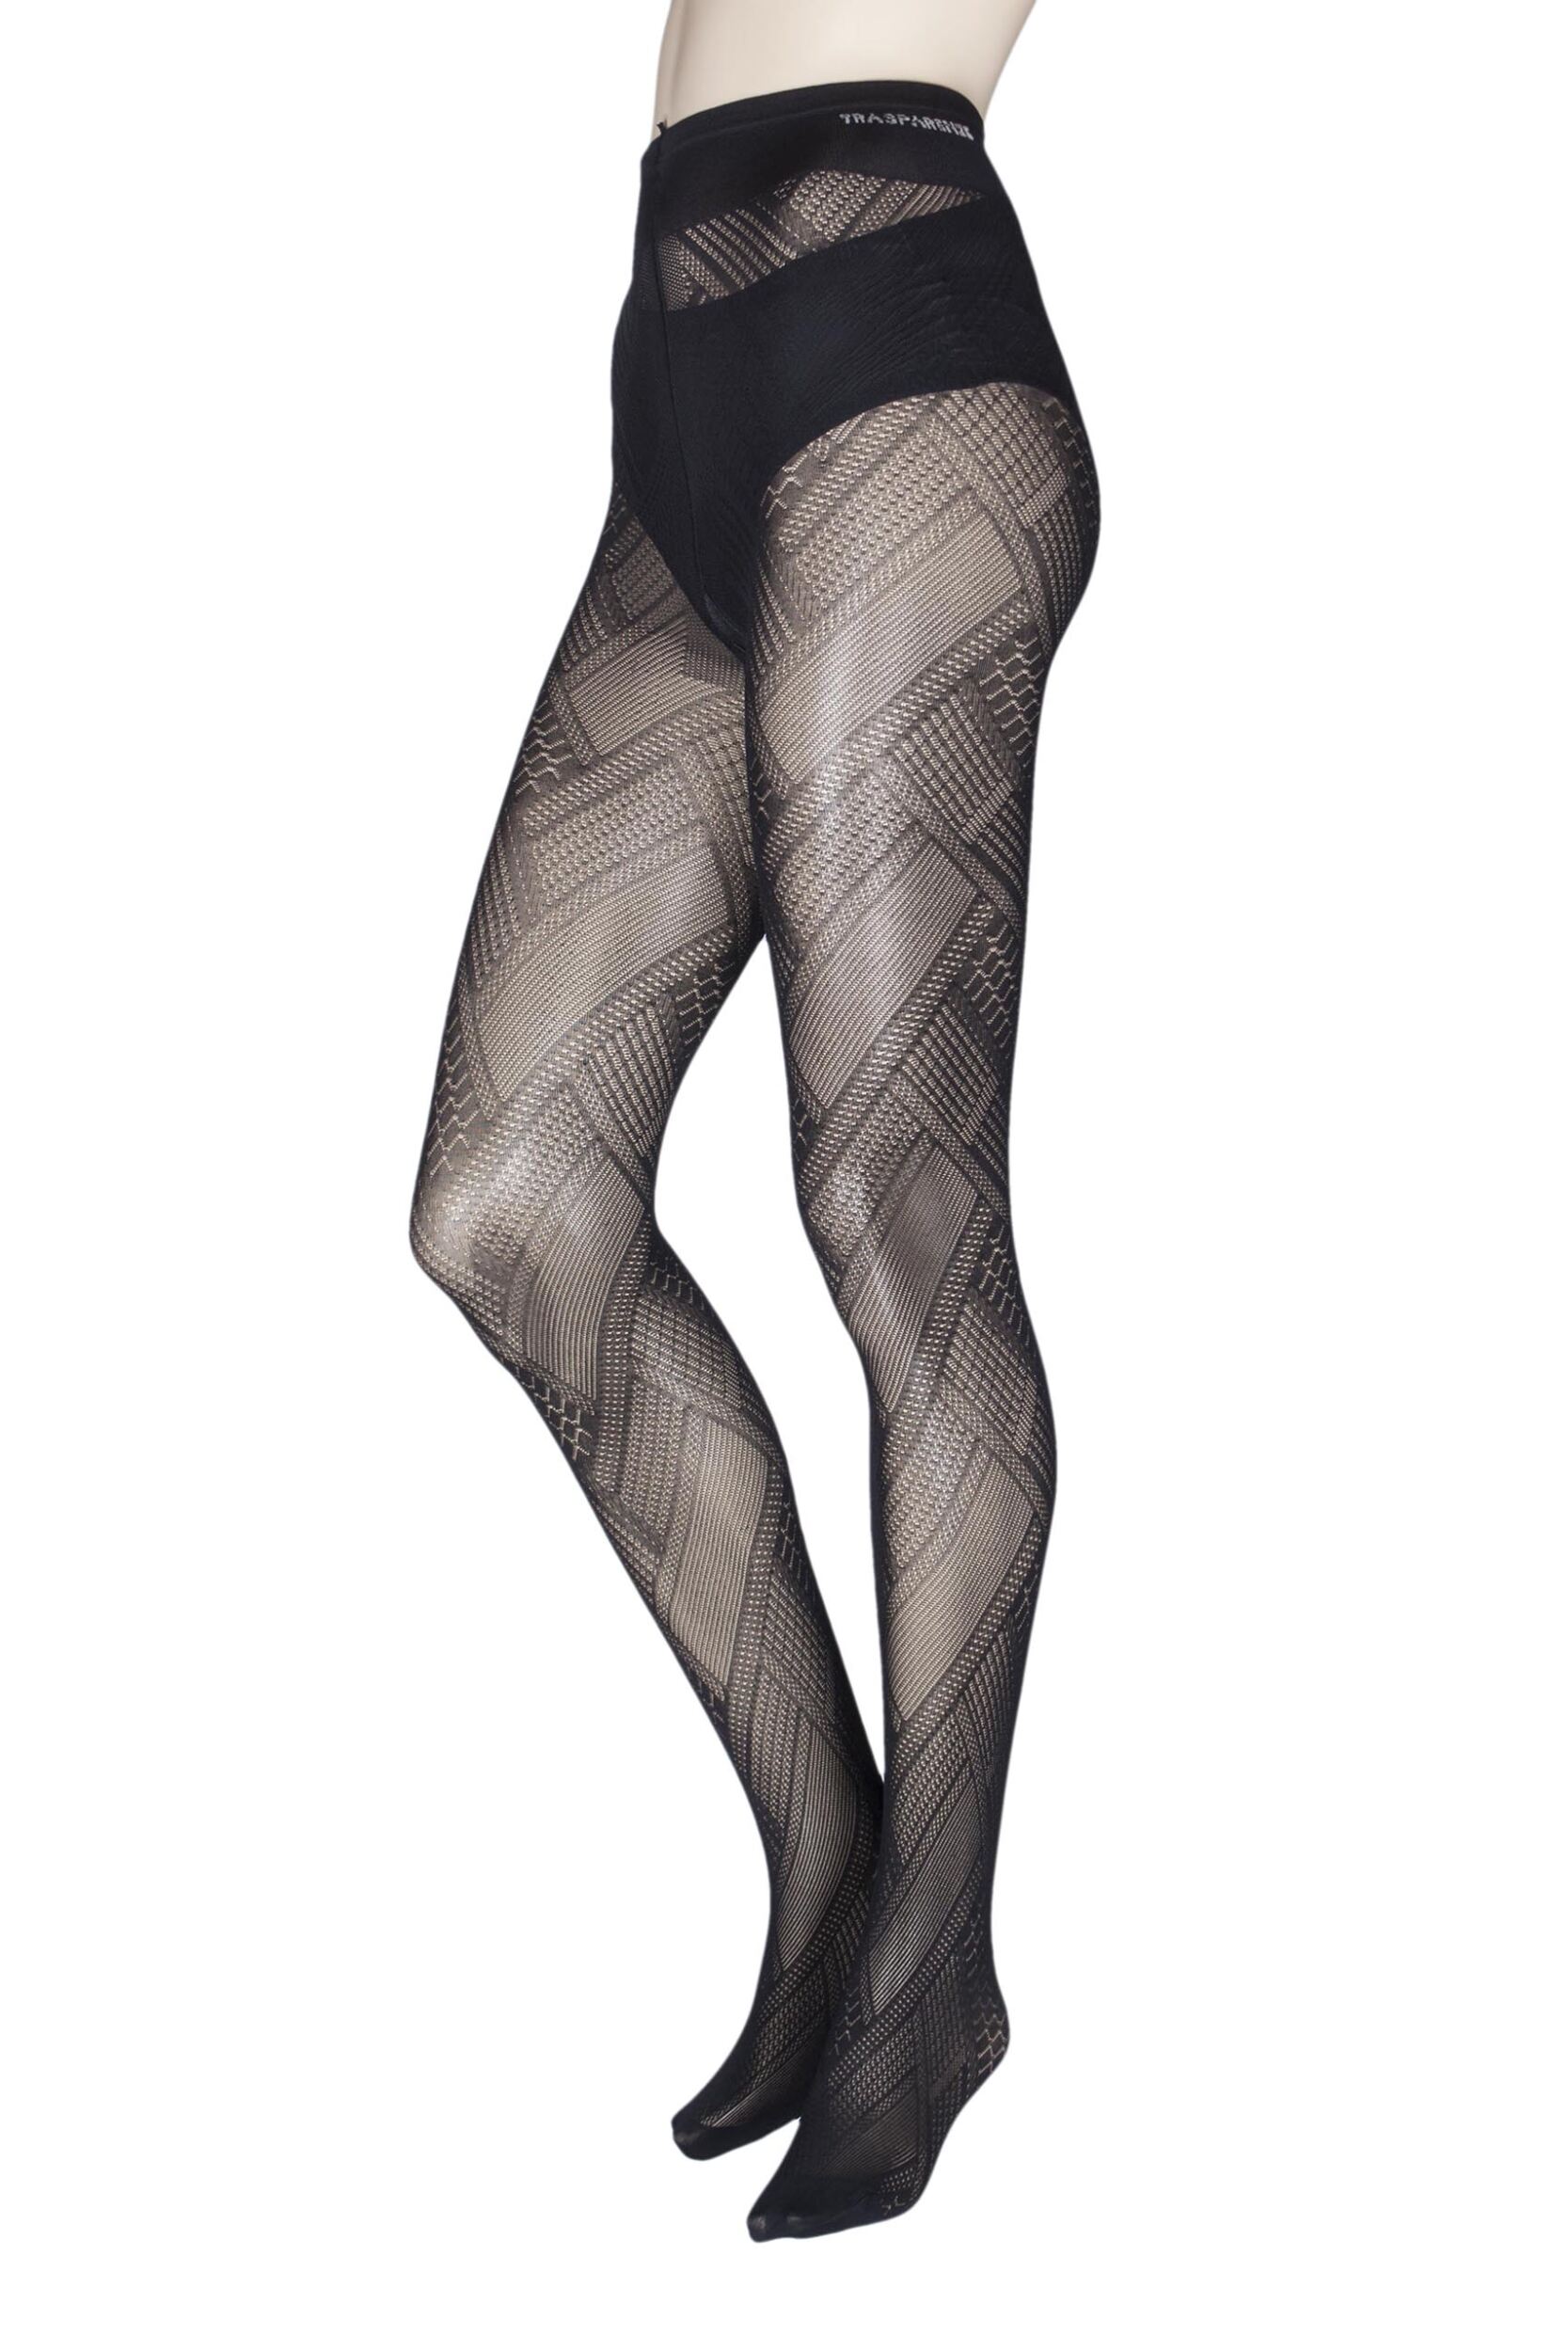 1 Pair Black Soave Patterned Opaque Tights Ladies Large - Trasparenze